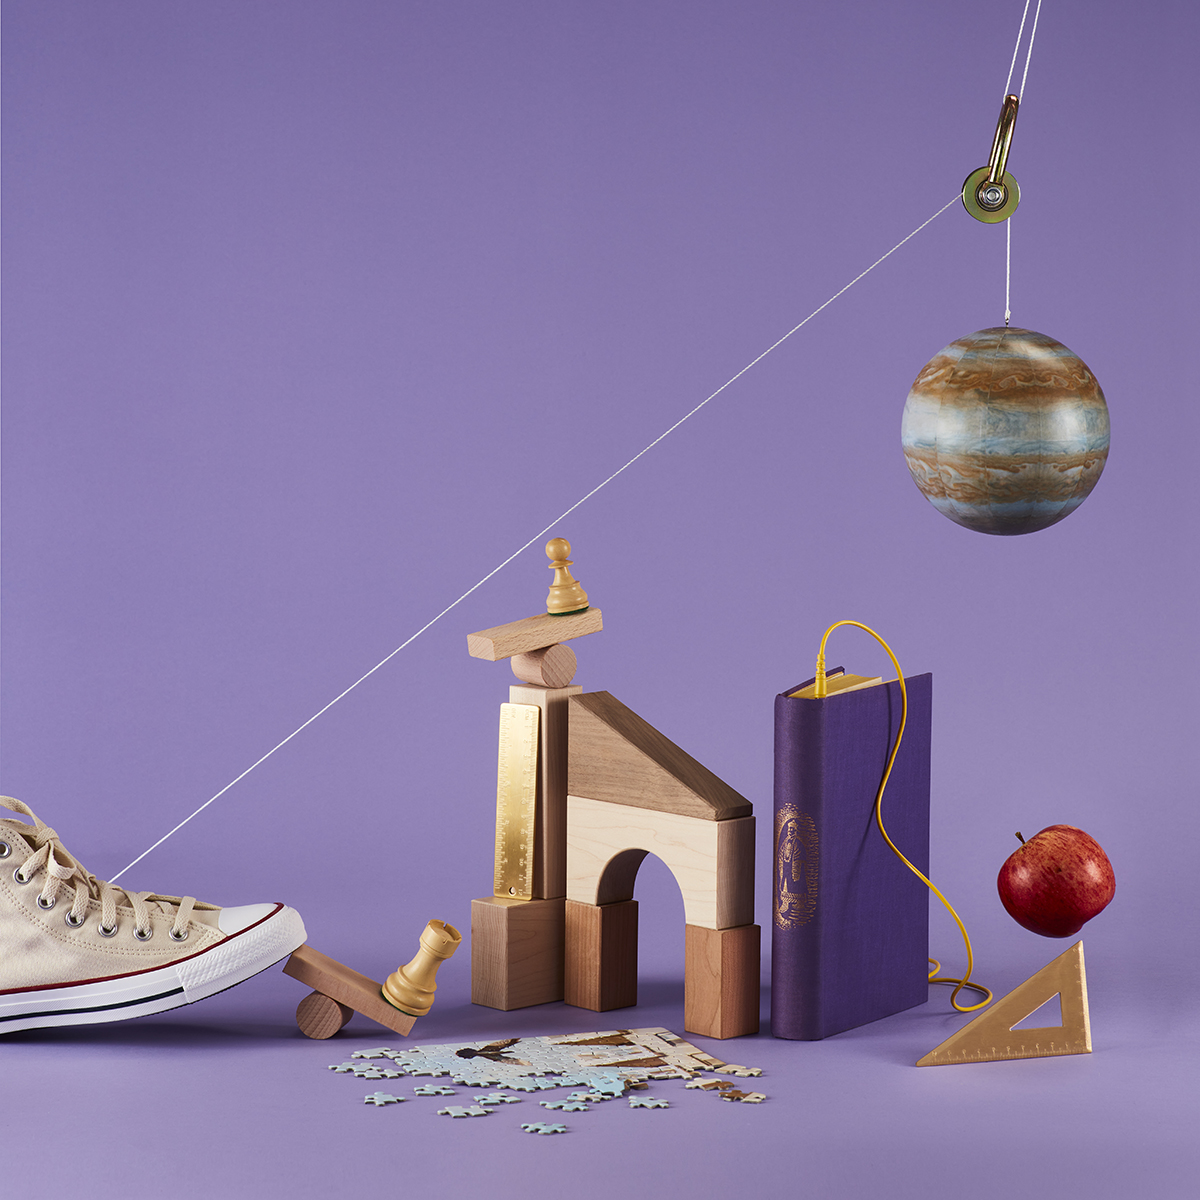 Still life of a white Converse shoe kicking off a Rube Goldberg machine involving chess pieces, wooden bloods, a book, an unmade puzzle, a planet on a pulley, and an apple rolling down a triangle.